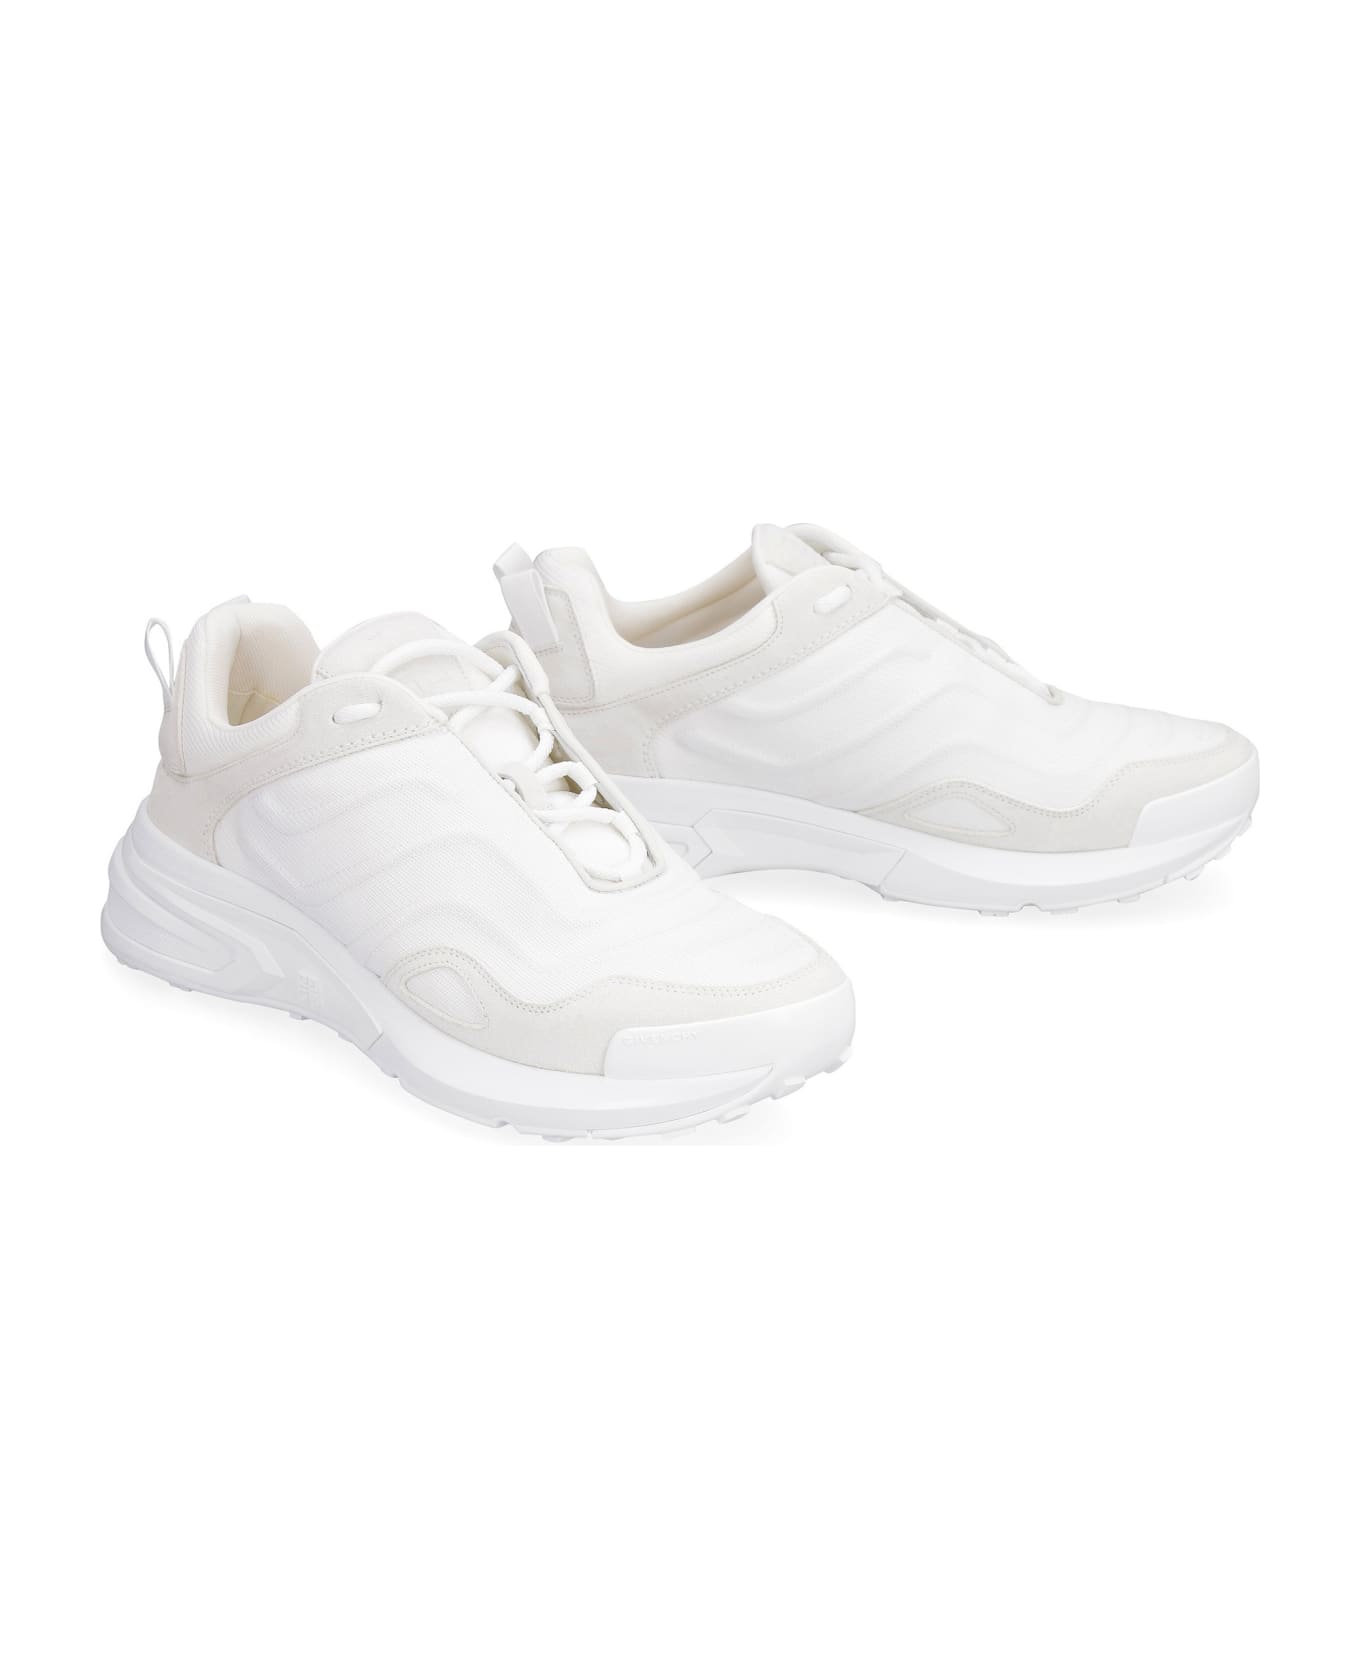 Givenchy Giv 1 Low-top Sneakers - Bianco